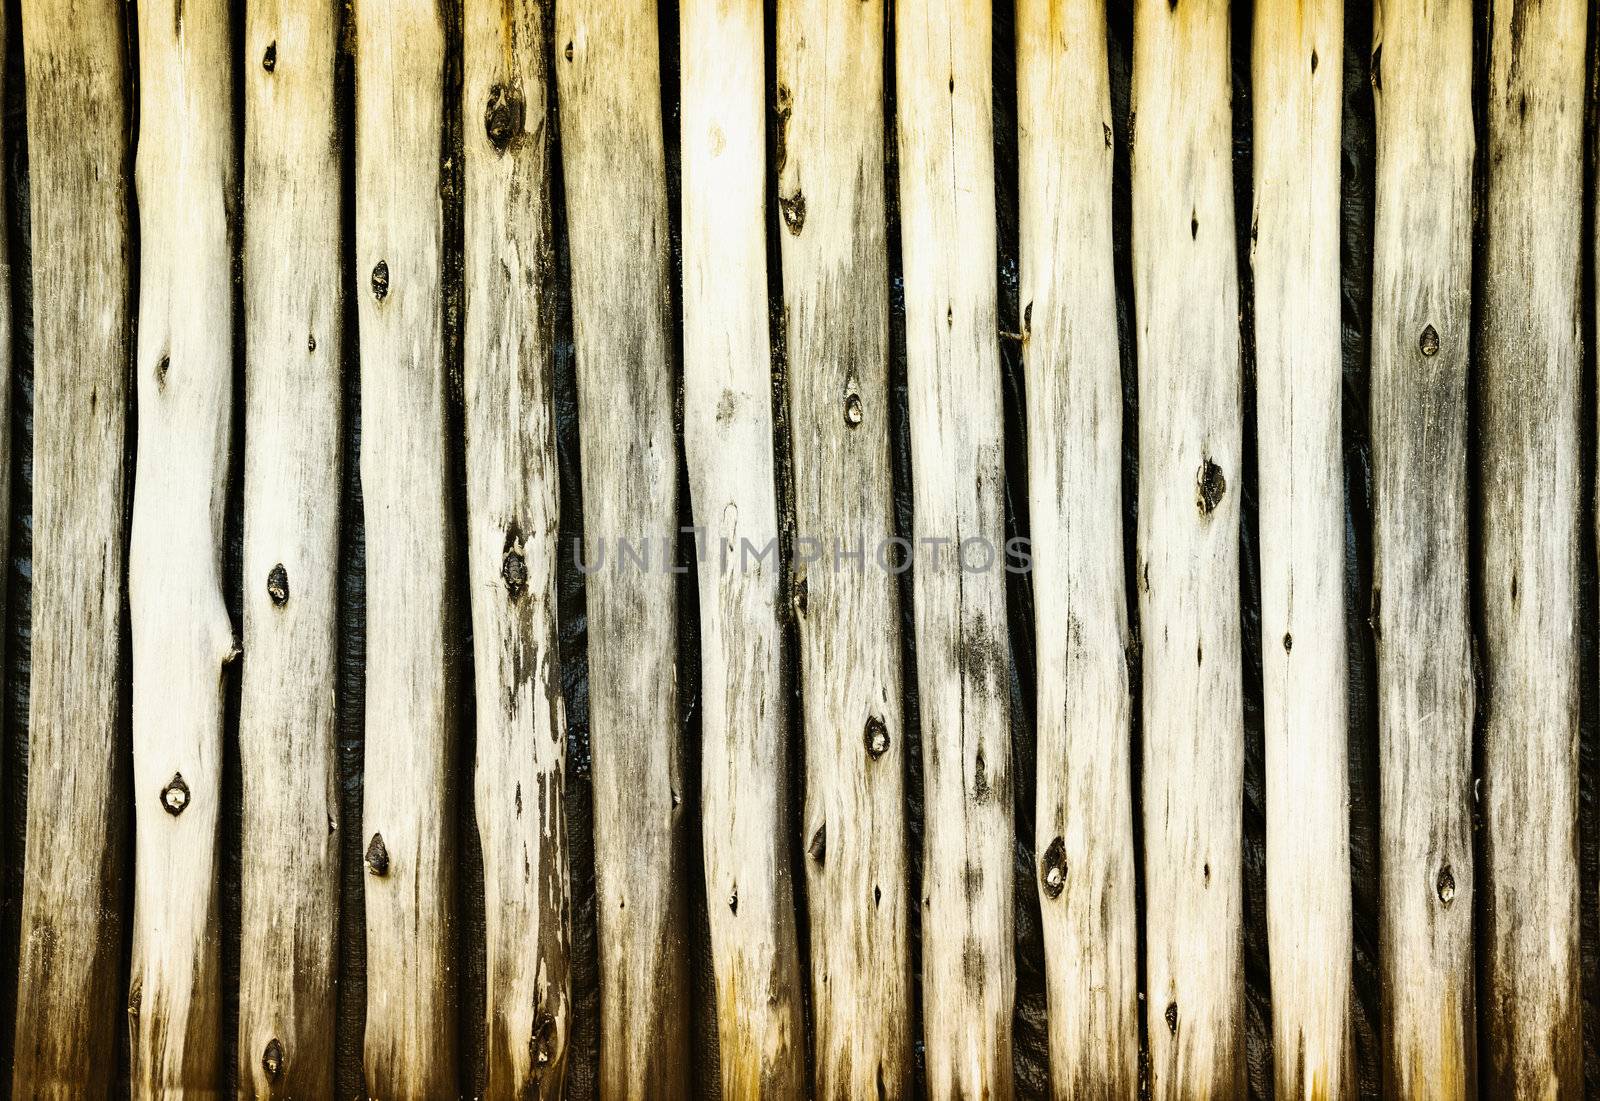 Dilapidated old wooden fence - a rural grunge background